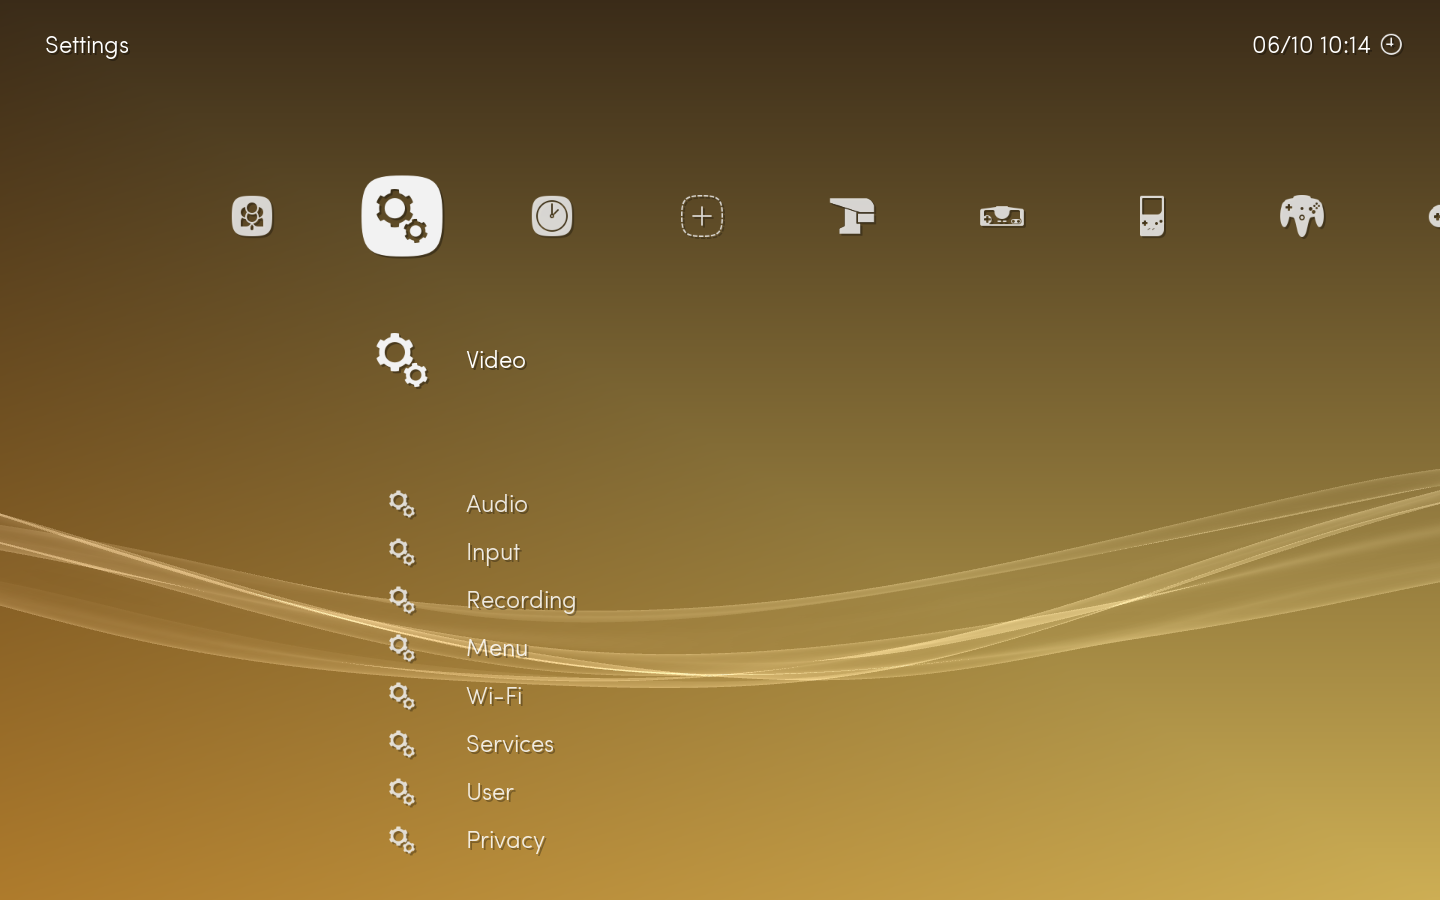 Simplified interface